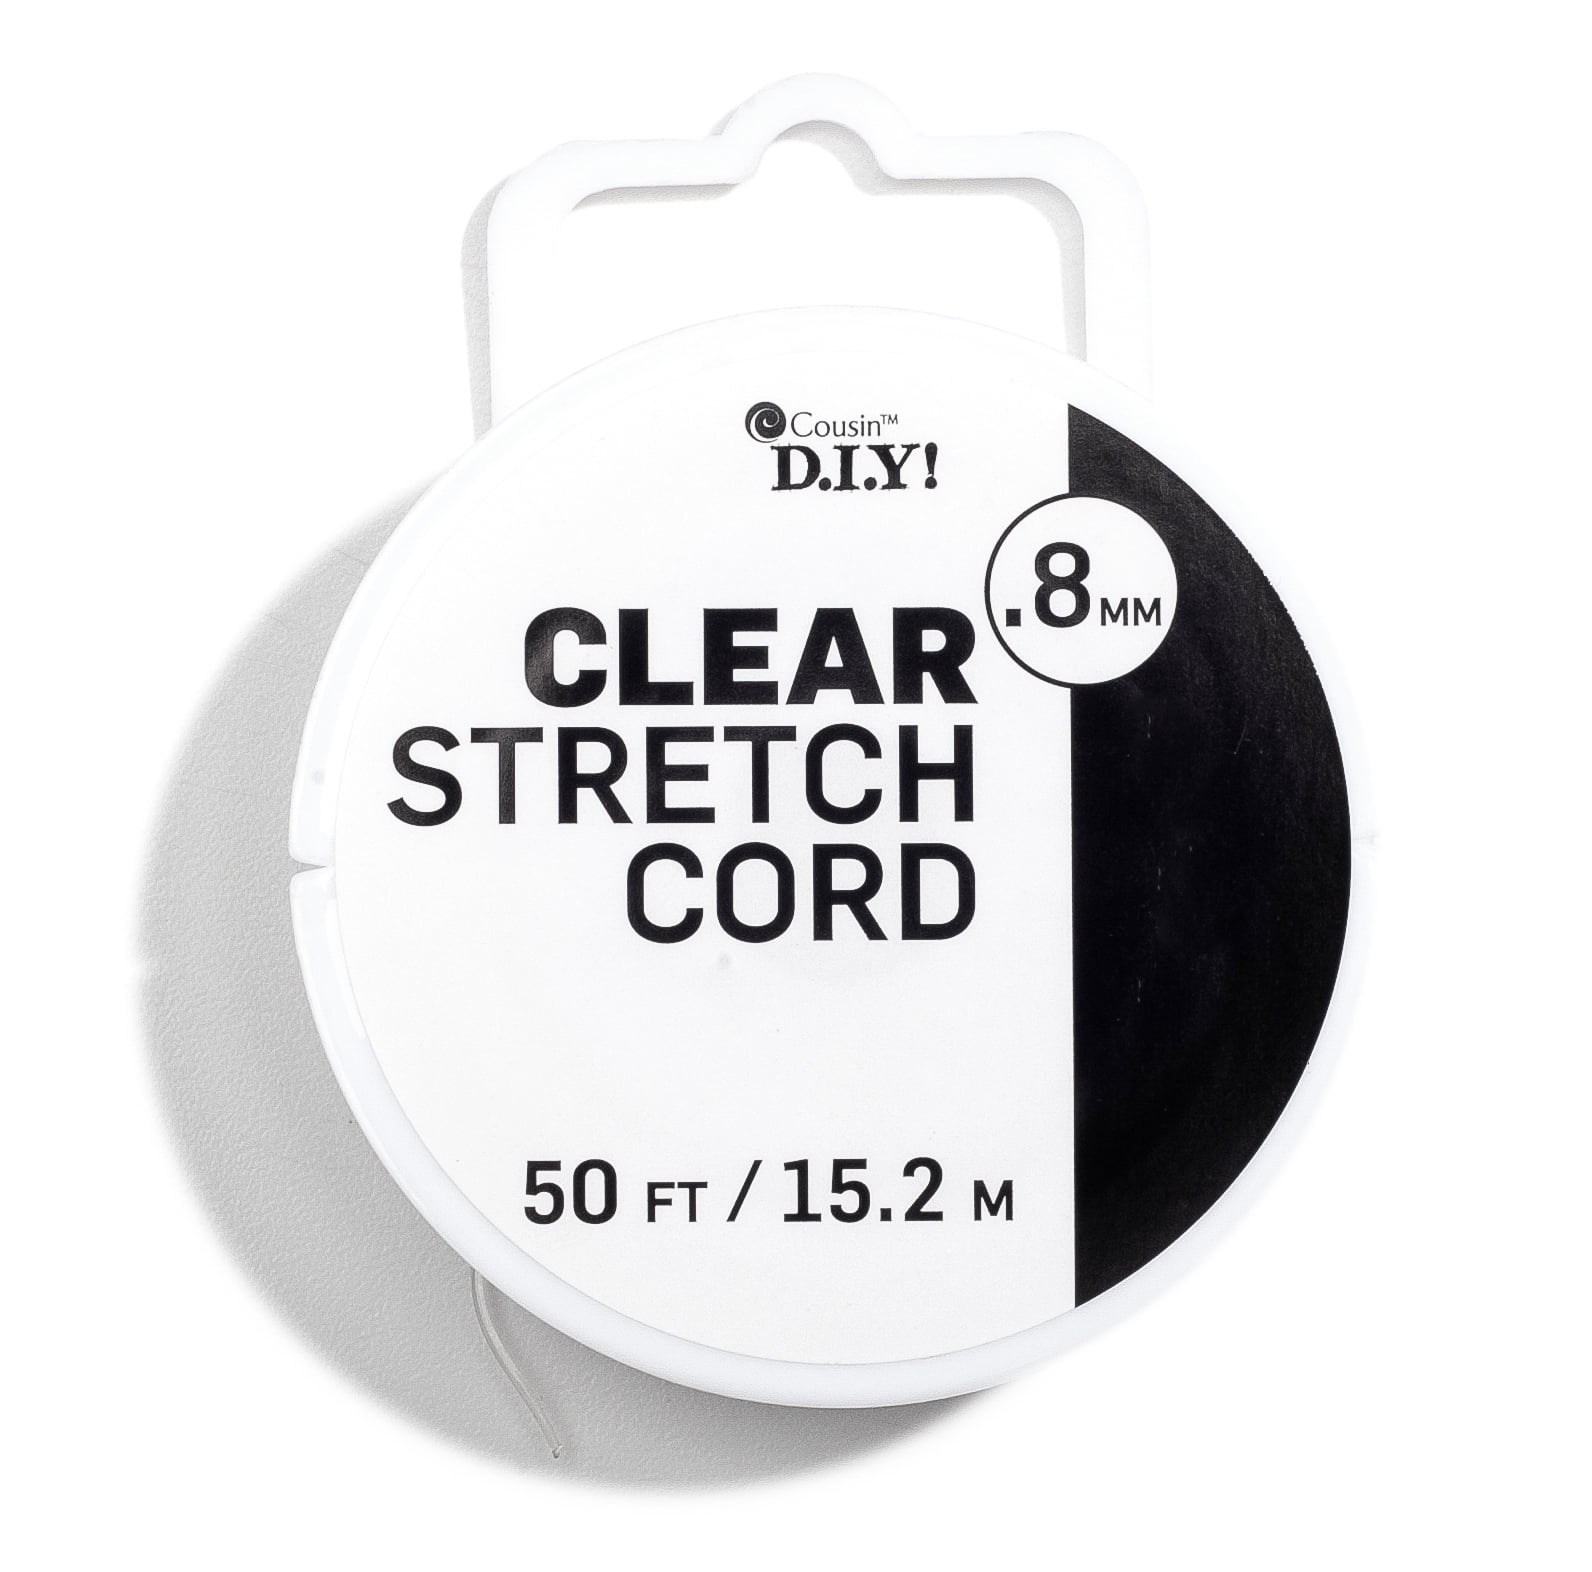 Cousin DIY Stretch Cord String, 16 yd, Clear and White 